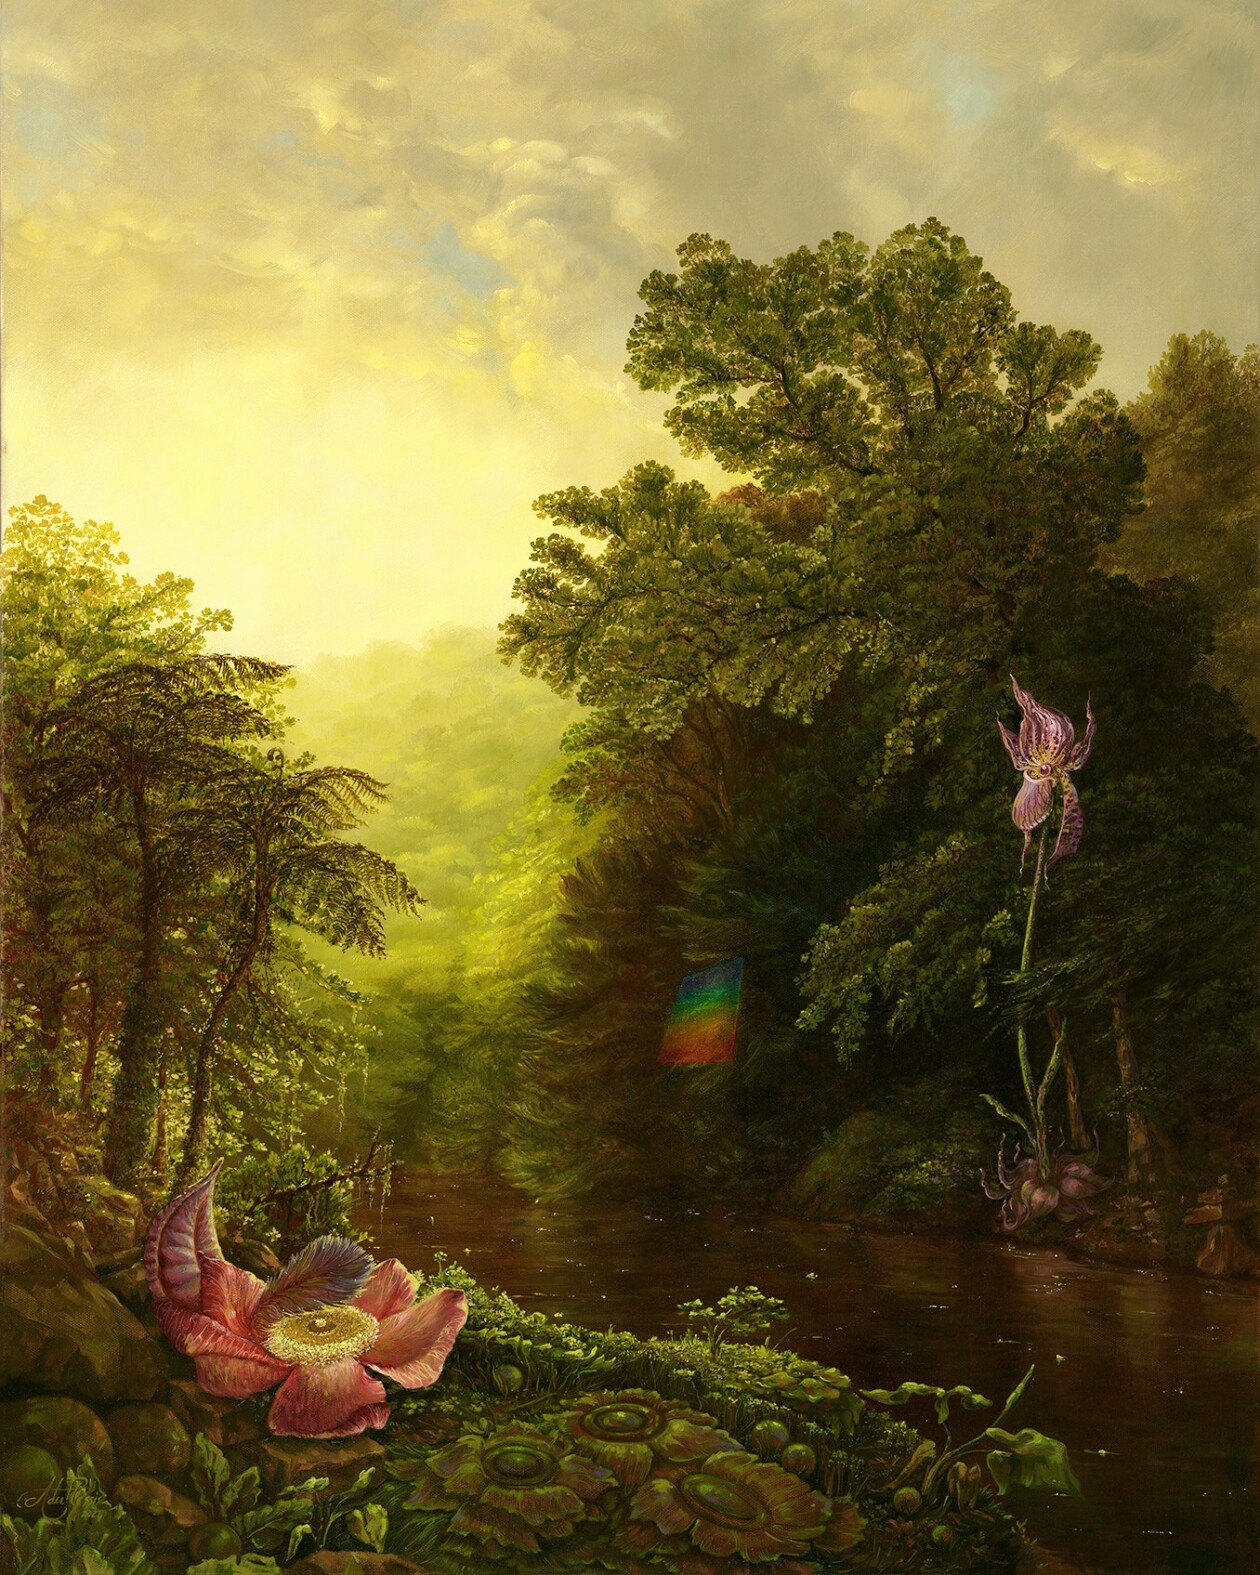 The Ethereal Landscape Paintings Of Andrea Du Plessis (12)